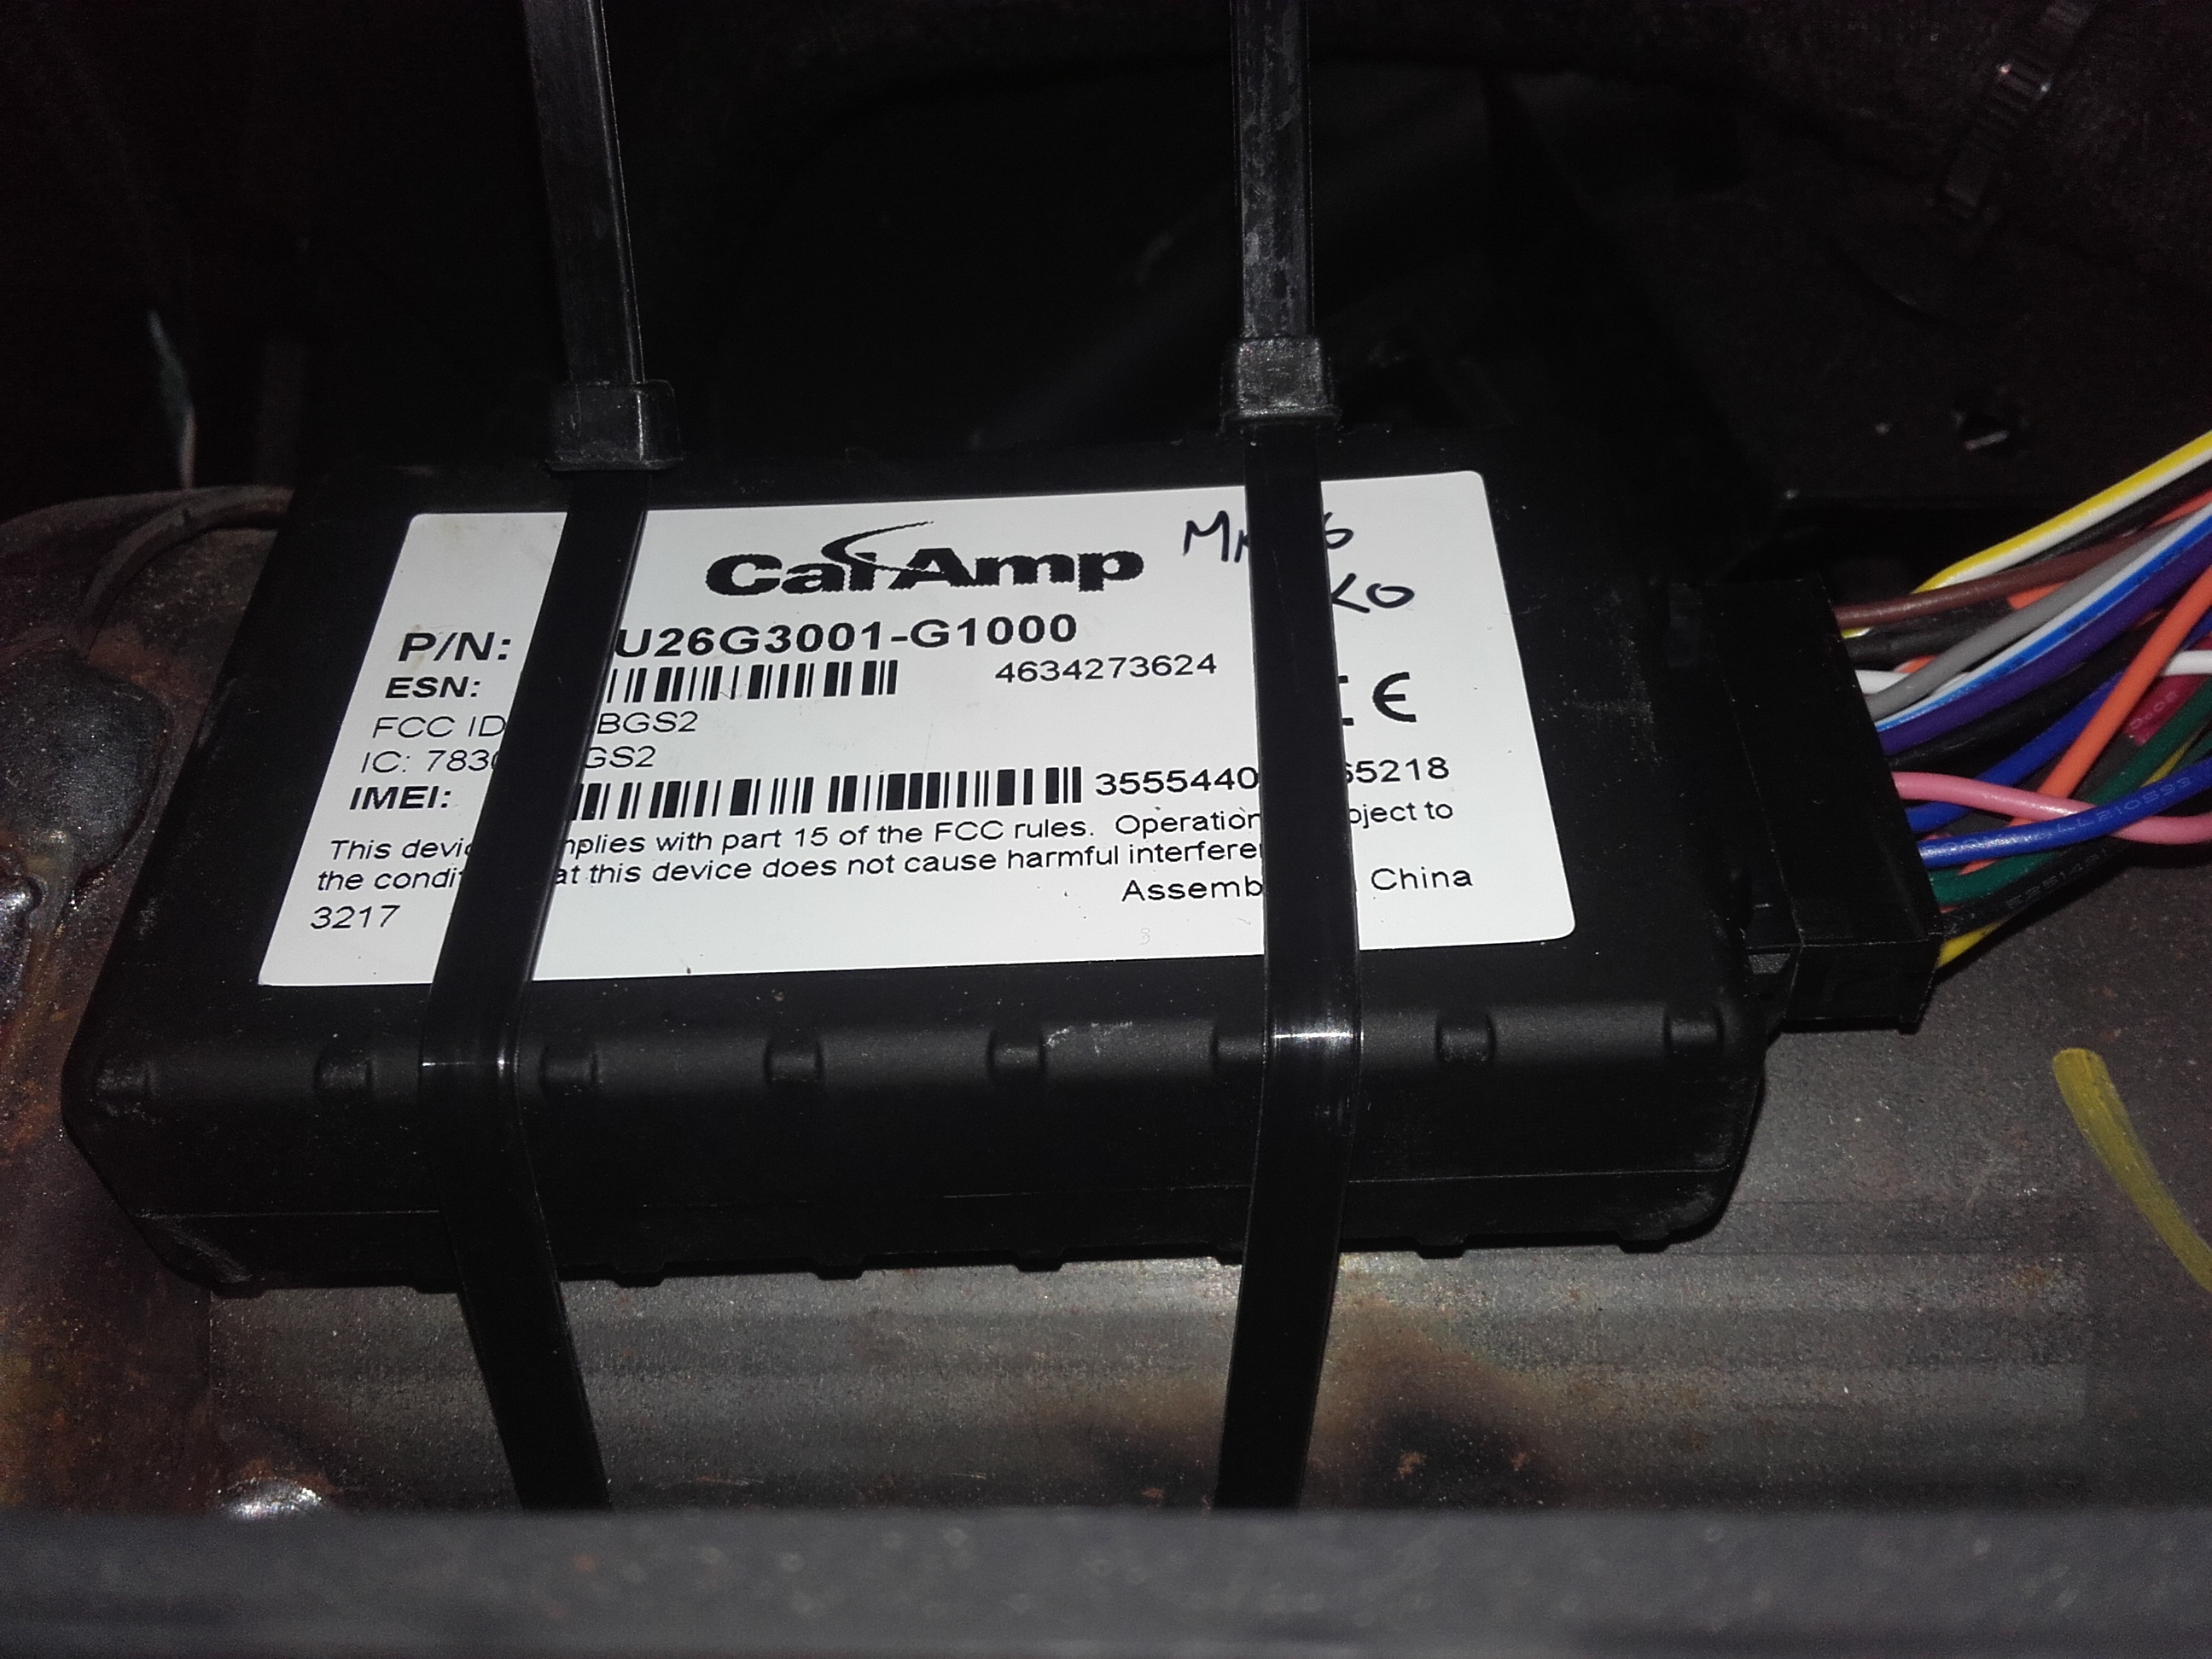 Calamp_-_Installed__Chassis_Mounted_.jpg